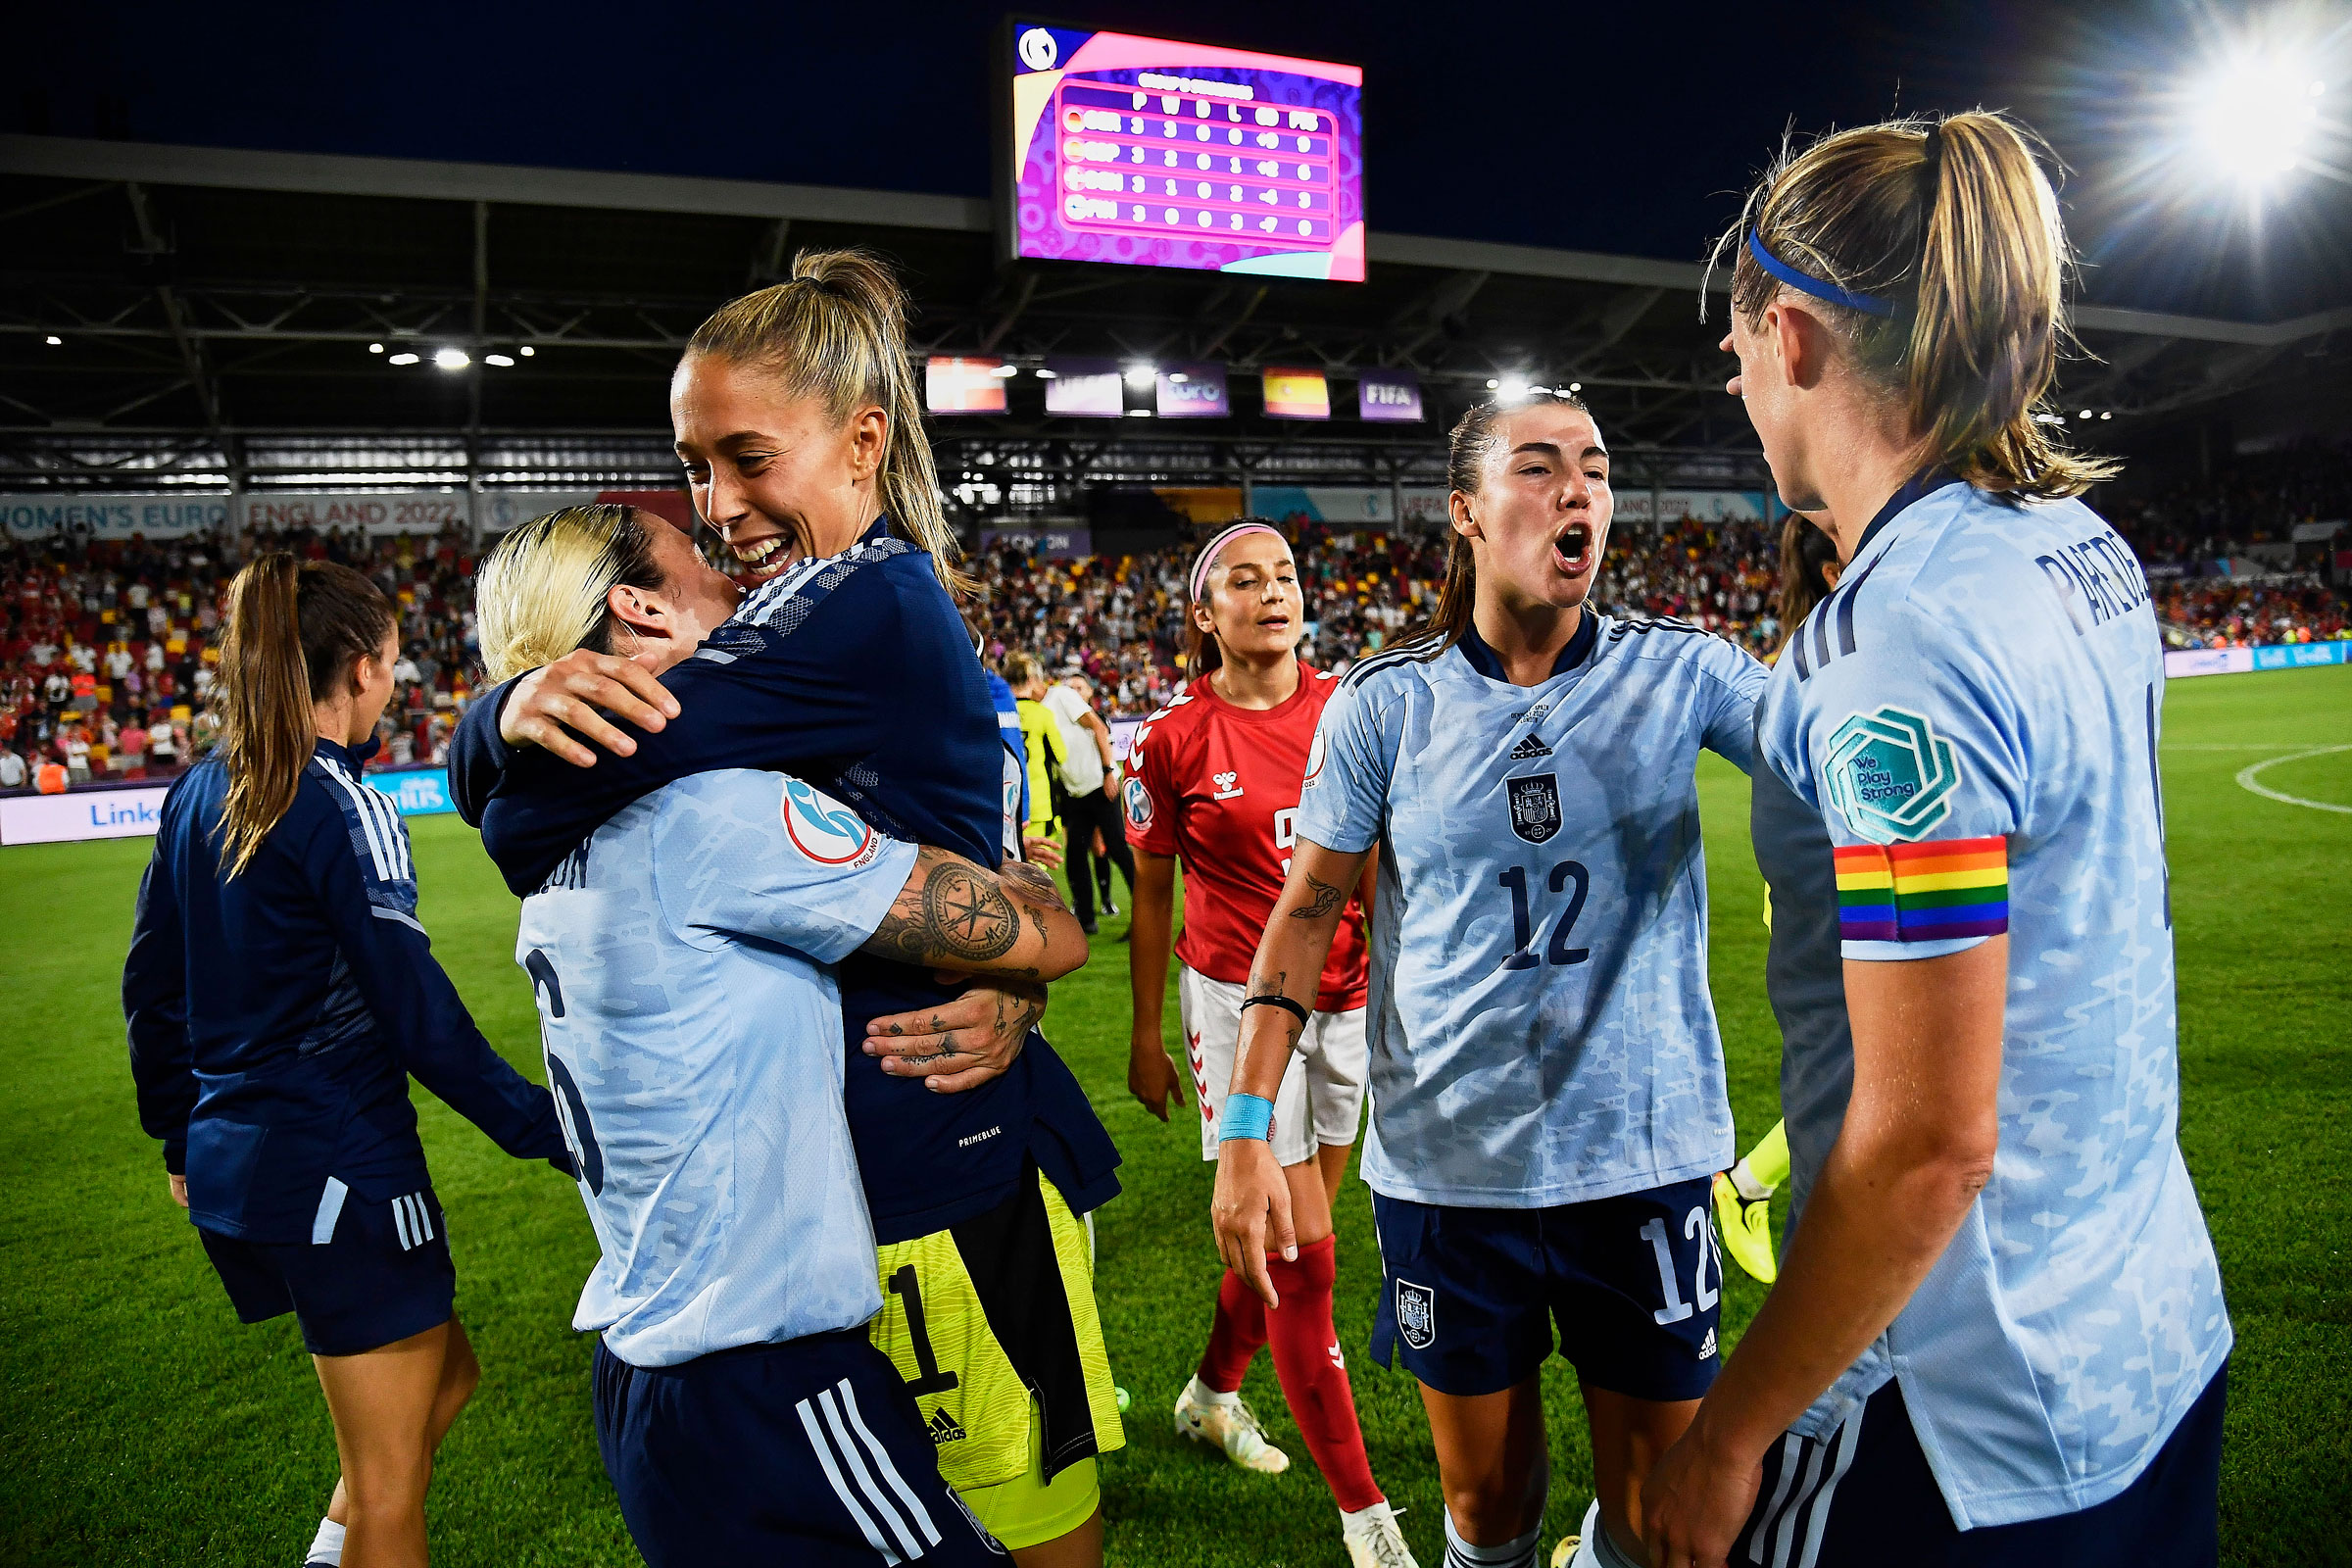 (L-R) Mapi Leon, Lola Gallardo, and Patricia Guijarro of Spain celebrate victory after the UEFA Women’s Euro England 2022 group B match between Denmark and Spain, at Brentford Community Stadium on July 16, 2022. Leon, Gallardo, and Guijarro are among players who will not be with the Spanish team at the Women’s World Cup. (Jose Breton—Pics Action/NurPhoto/Getty Images)